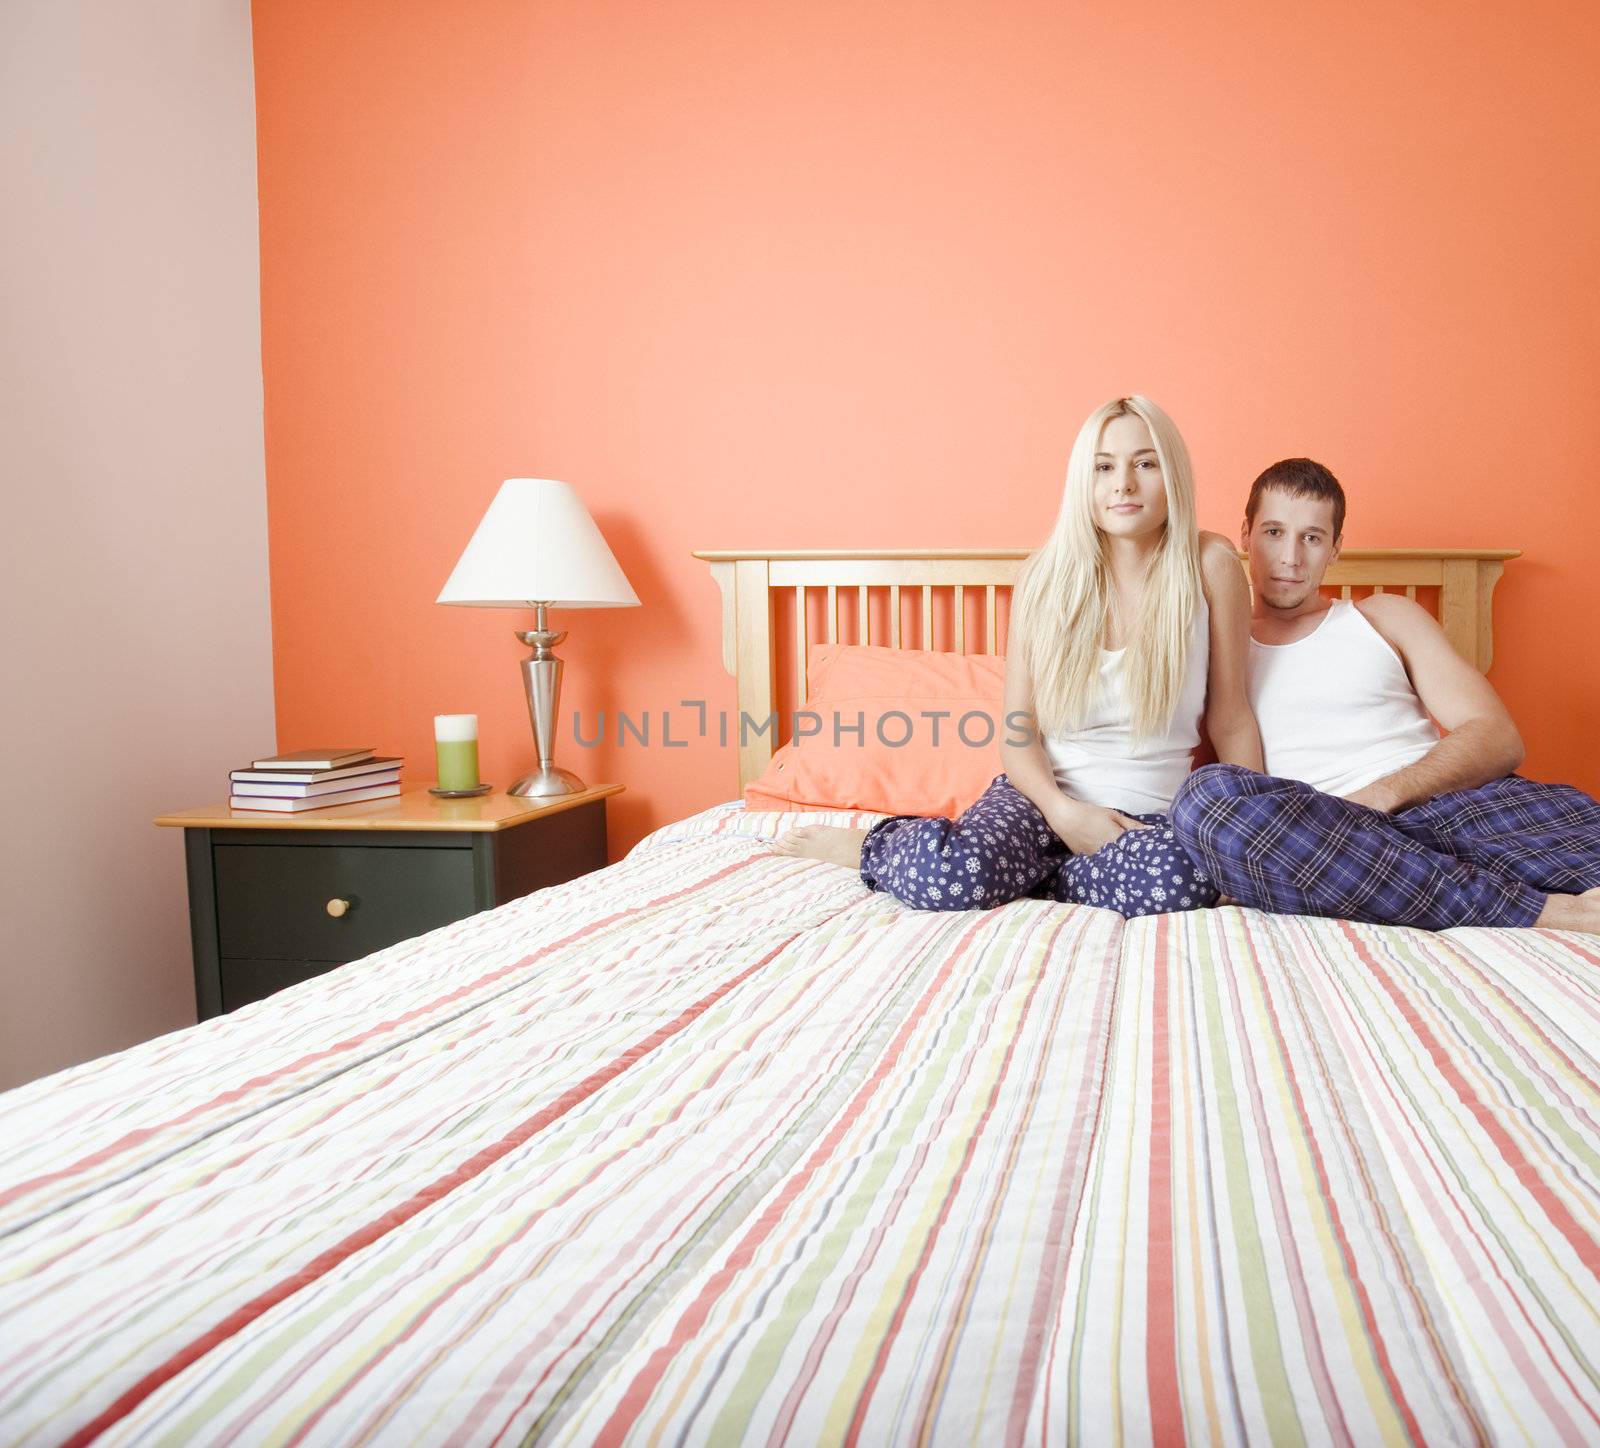 Young couple sitting on bed with stripped bedspread. Horizontal shot.